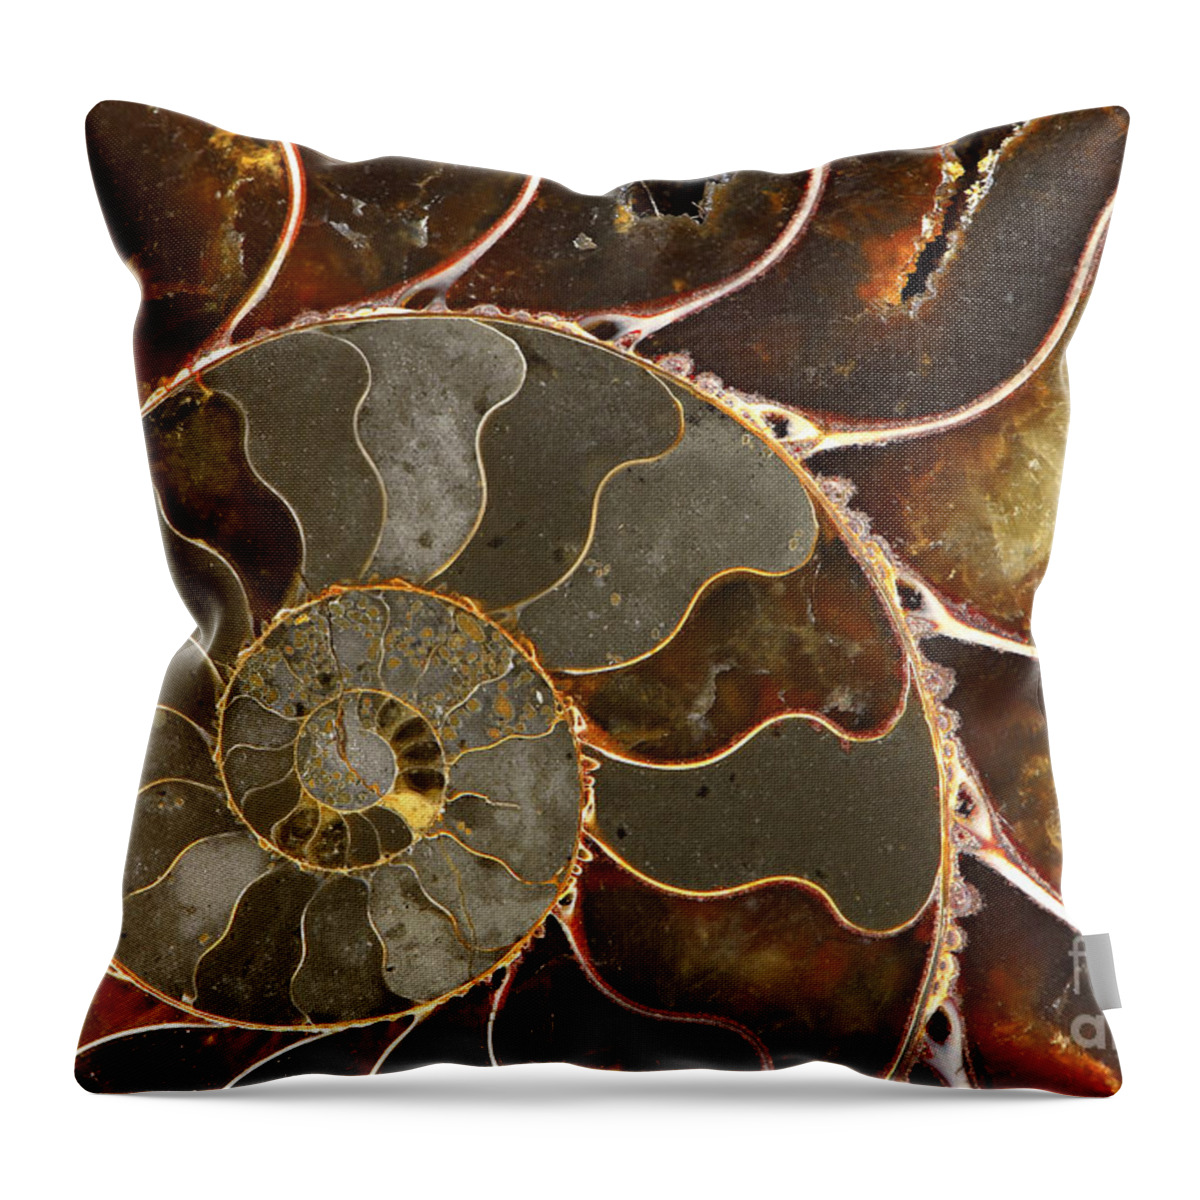 Shell Throw Pillow featuring the photograph Ammolite by Elena Elisseeva